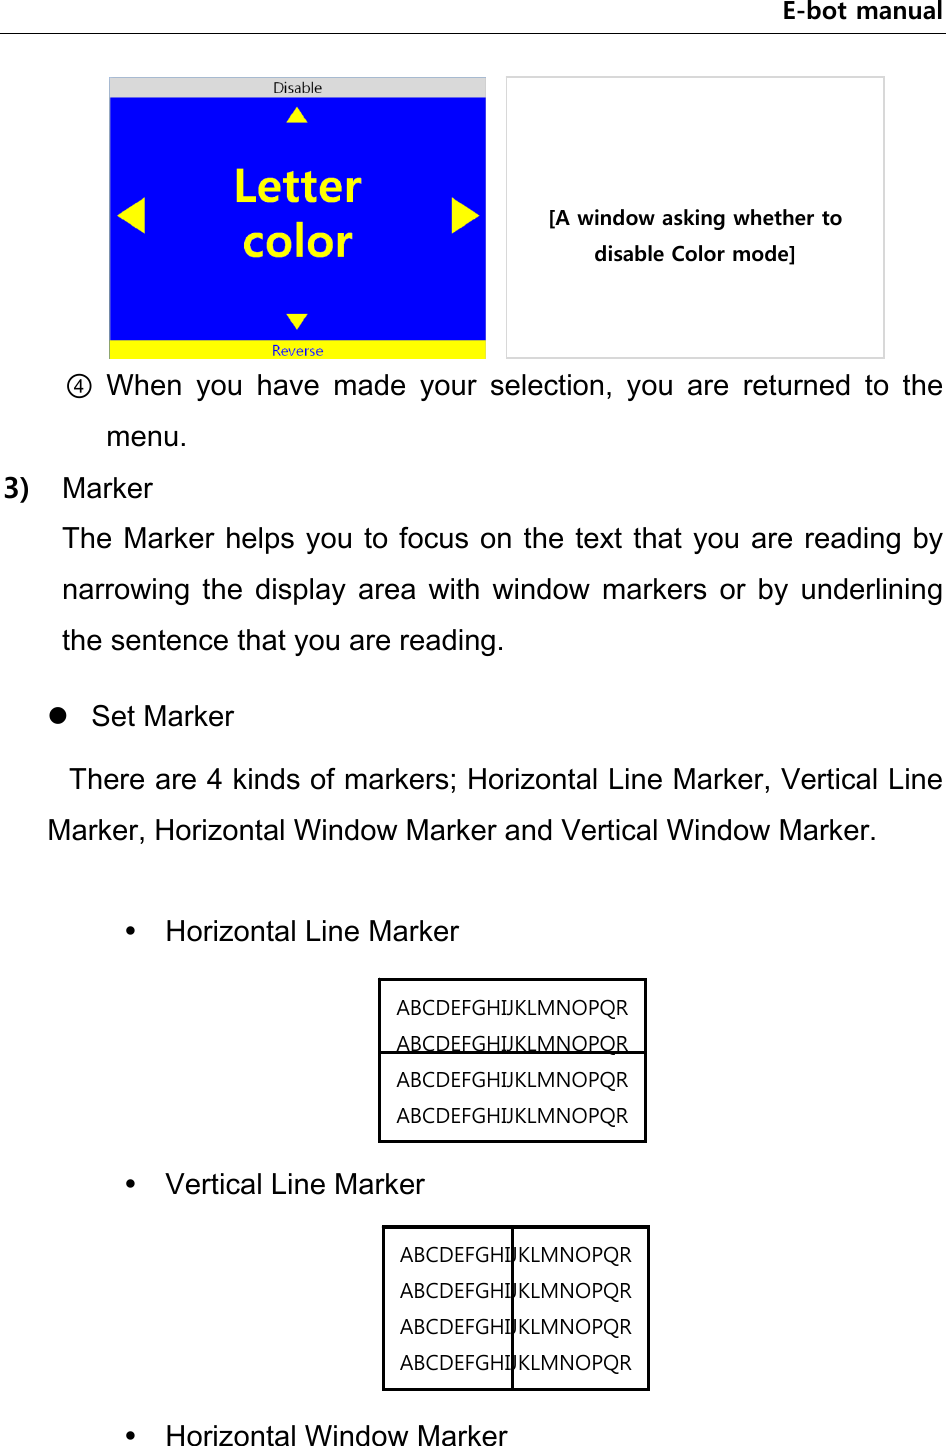 E-bot manual     ④ When  you  have  made  your  selection,  you  are  returned  to  the menu.   3) Marker The Marker helps you to focus on the text that you are reading by narrowing  the  display  area  with  window  markers  or  by  underlining the sentence that you are reading.    Set Marker There are 4 kinds of markers; Horizontal Line Marker, Vertical Line Marker, Horizontal Window Marker and Vertical Window Marker.   Horizontal Line Marker      Vertical Line Marker      Horizontal Window Marker [A window asking whether to disable Color mode] ABCDEFGHIJKLMNOPQRABCDEFGHIJKLMNOPQRABCDEFGHIJKLMNOPQRABCDEFGHIJKLMNOPQRABCDEFGHIJKLMNOPQRABCDEFGHIJKLMNOPQRABCDEFGHIJKLMNOPQRABCDEFGHIJKLMNOPQR